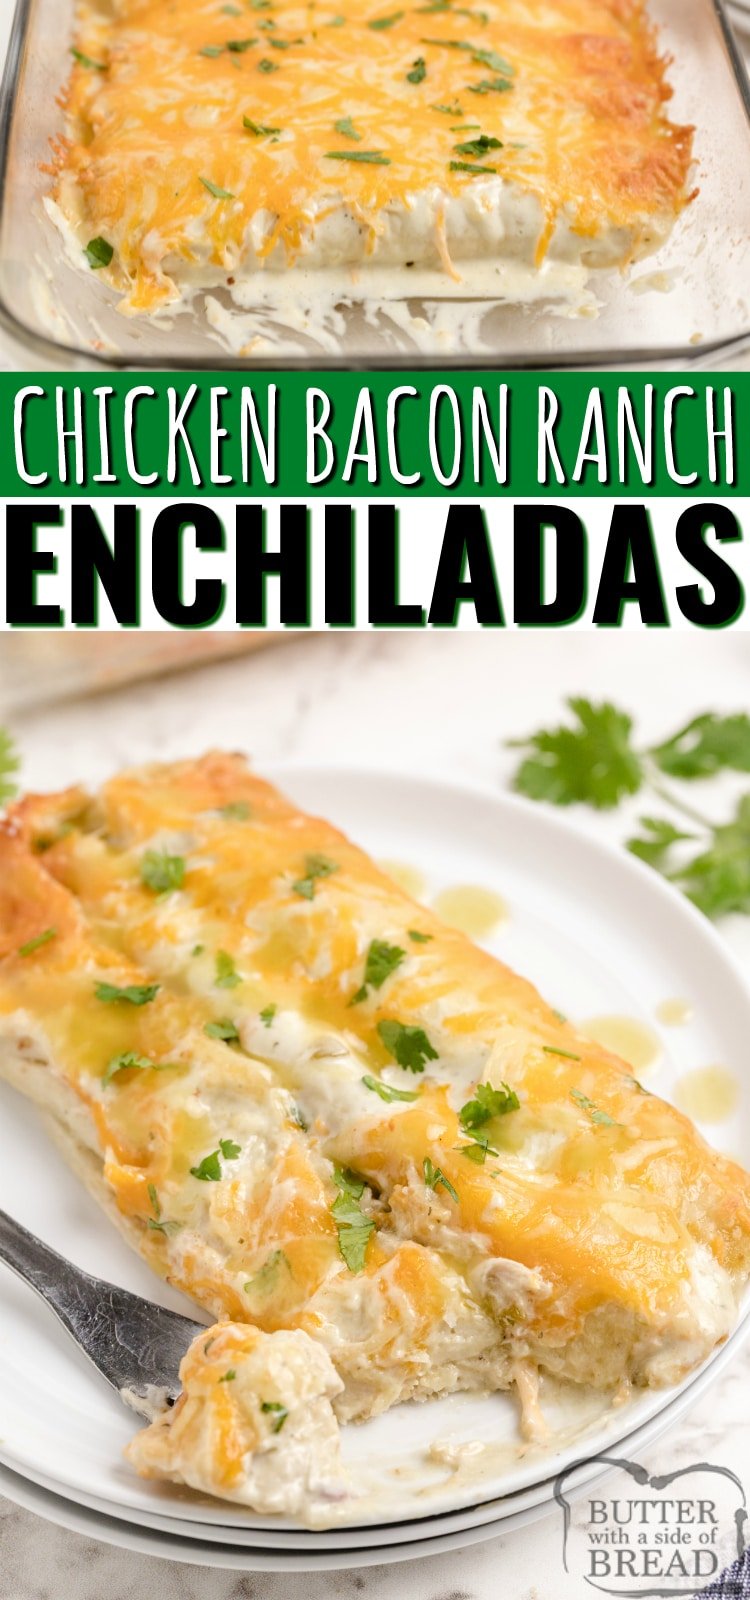 Chicken Bacon Ranch Enchiladas made with chicken, bacon, ranch dressing and cheese. Simple chicken enchilada recipe with a little bit of a twist! Easy dinner recipe that comes together quickly with tons of flavor that even the pickiest eater will love.